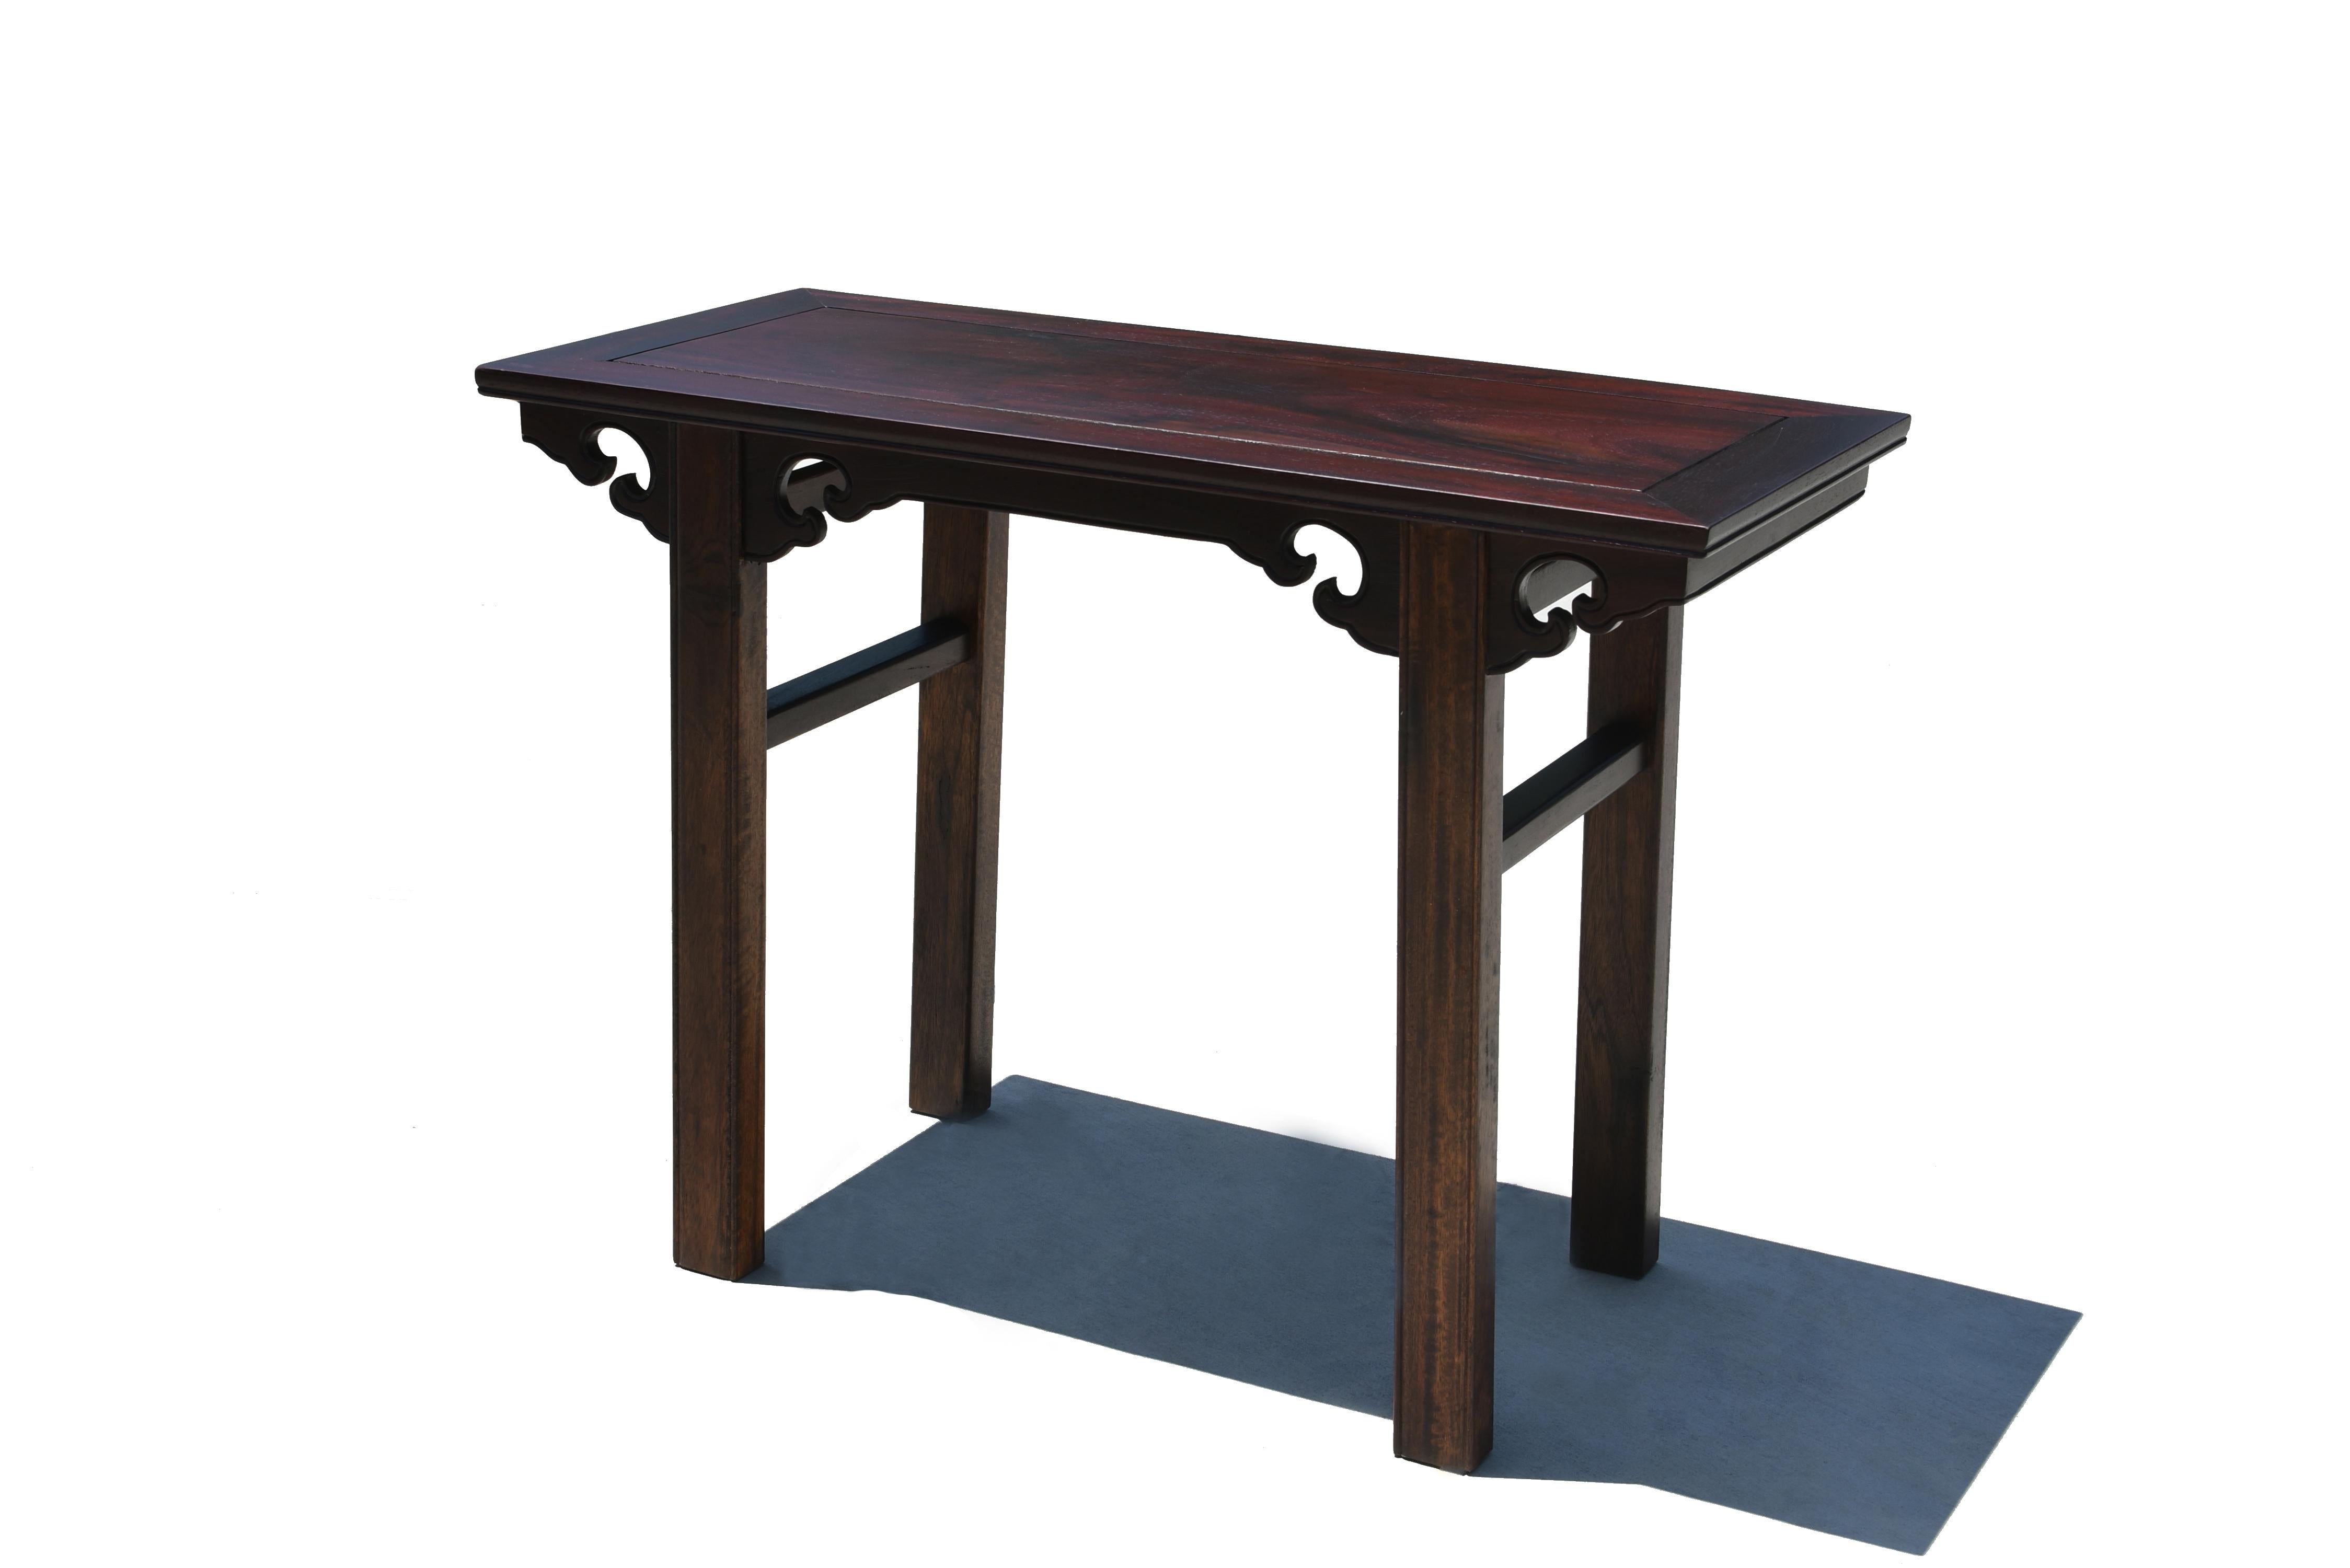 A beautiful late 19th century wine table from Northern China. The tabletop is constructed of four members joined by mitered tenons surrounding a floating panel made of a prized, solid single board of red elmwood. Such an ingenuine design allows the